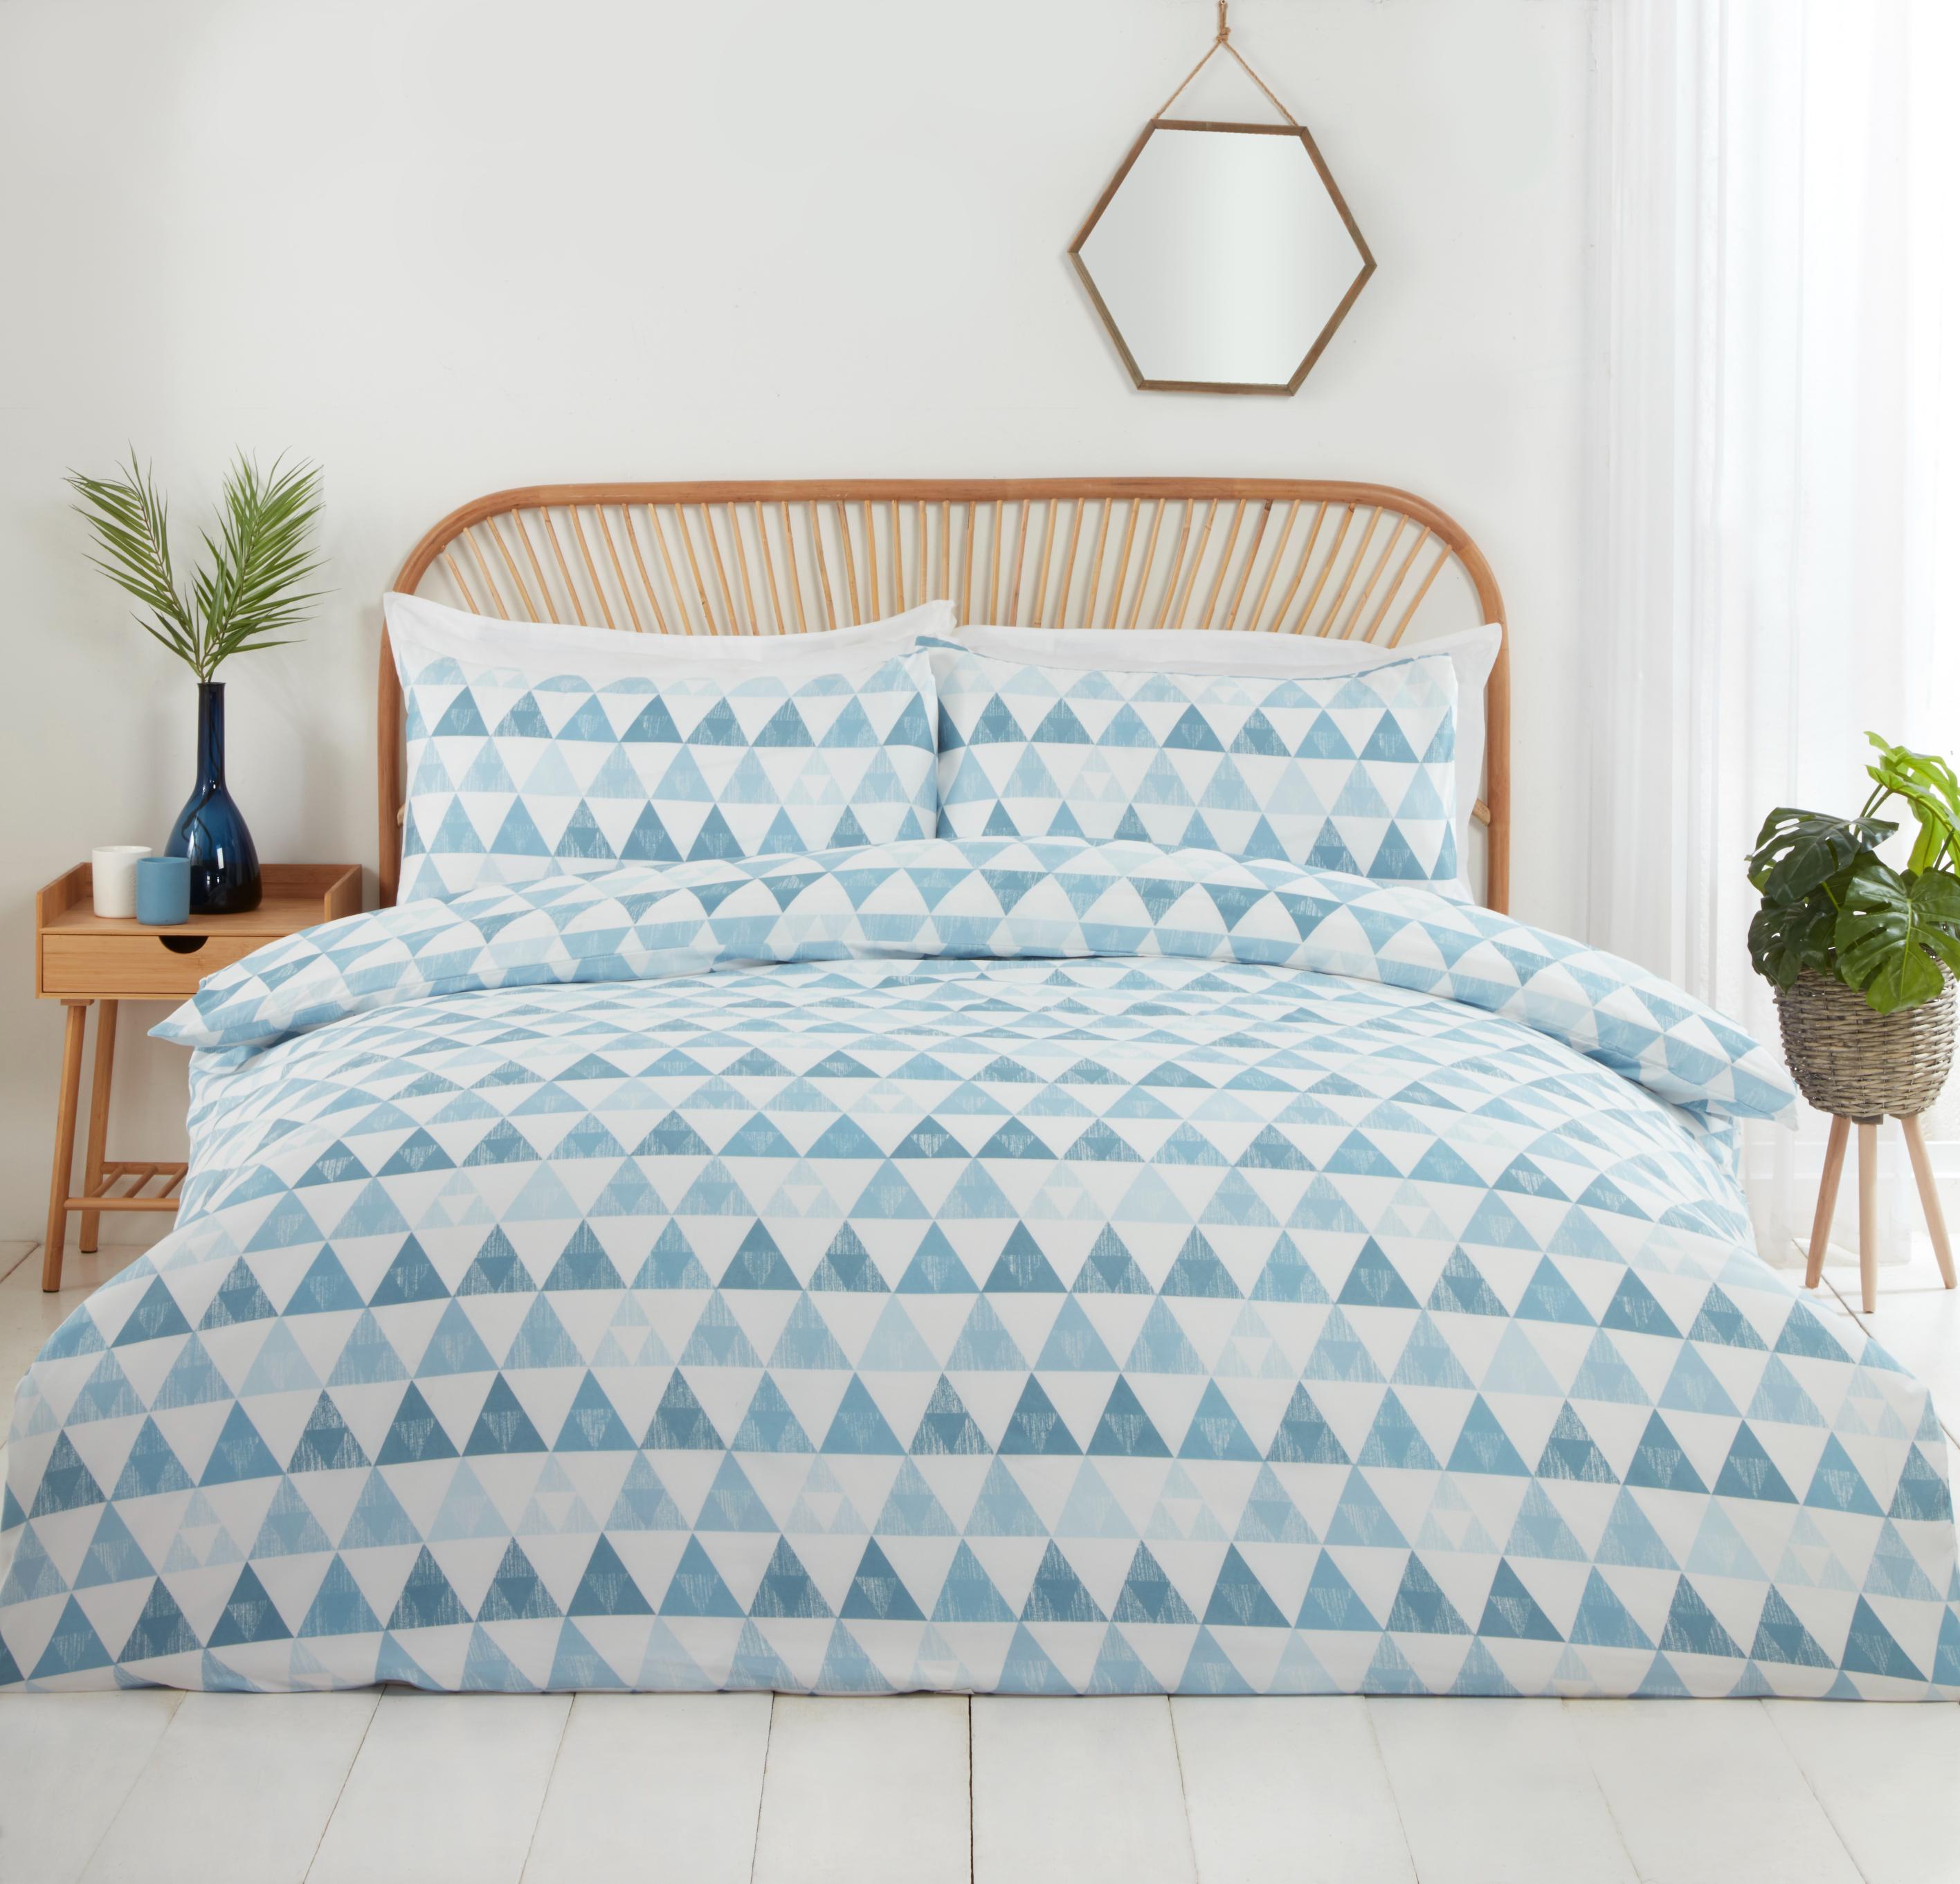 Lewis’s Printed Bed In A Bag - Blue Geometric Triangle - King  | TJ Hughes